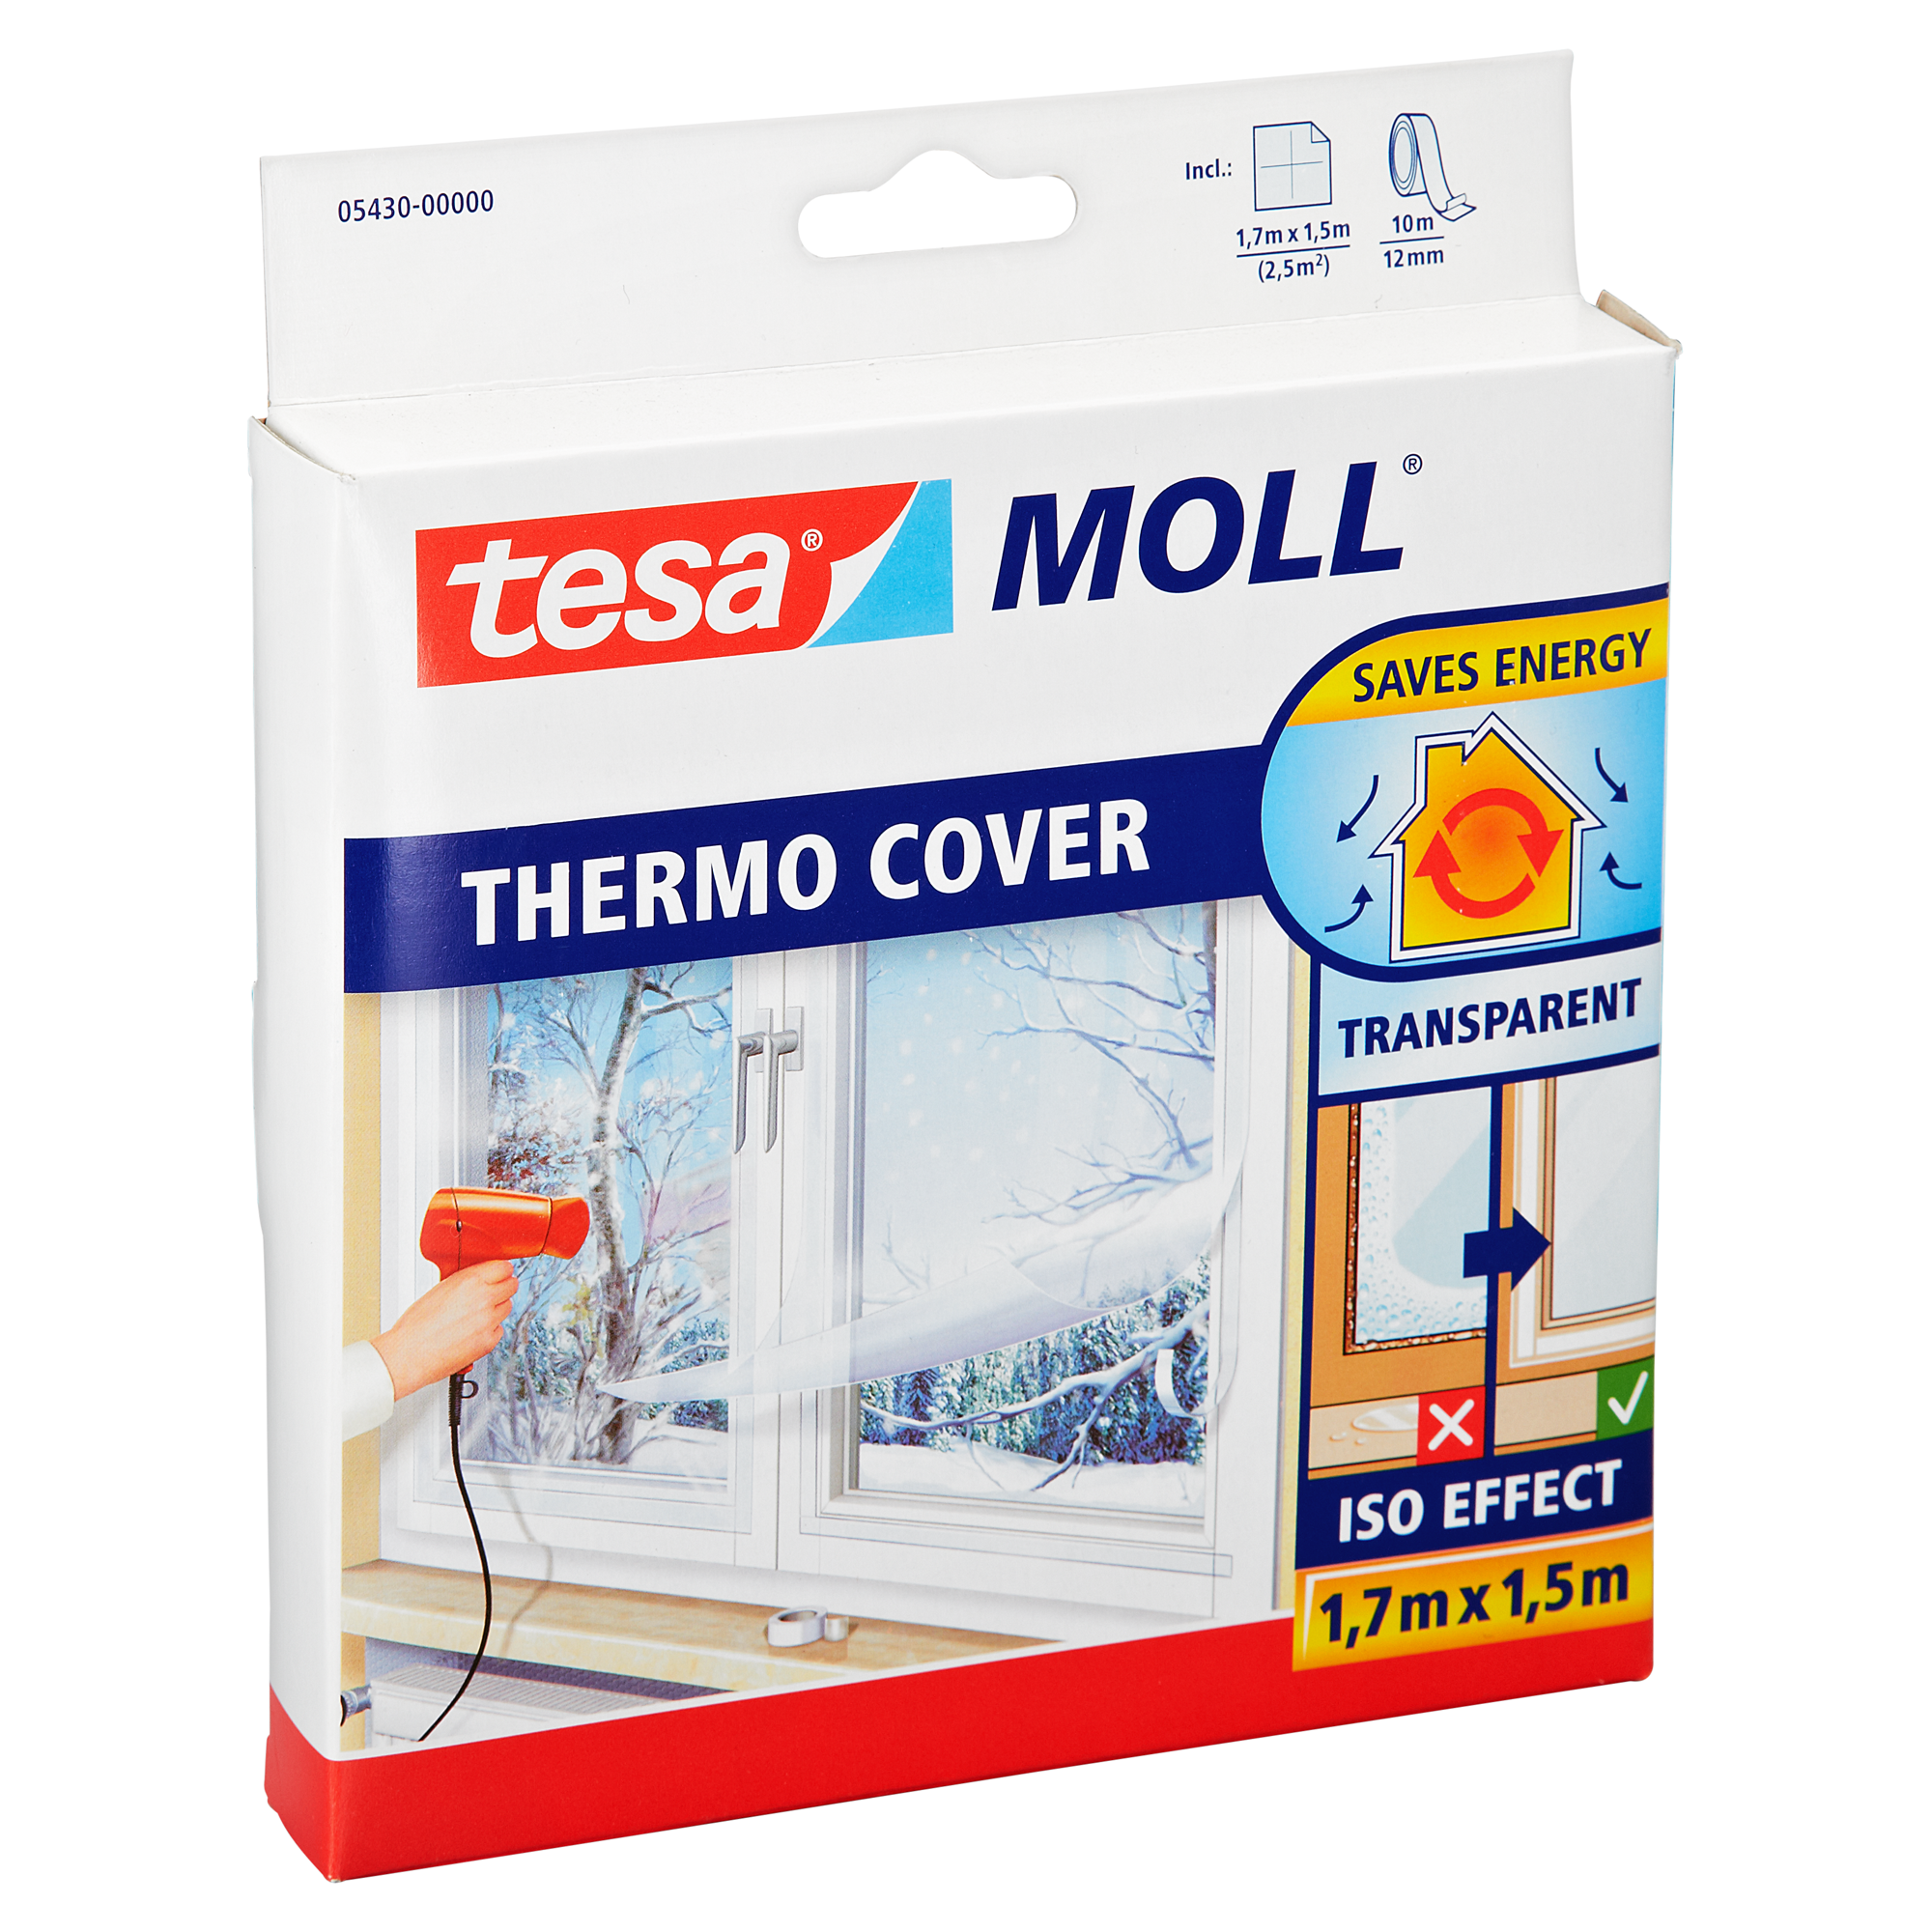 Tesa Moll "Thermo Cover" Fensterfolie 170 x 150 cm + product picture